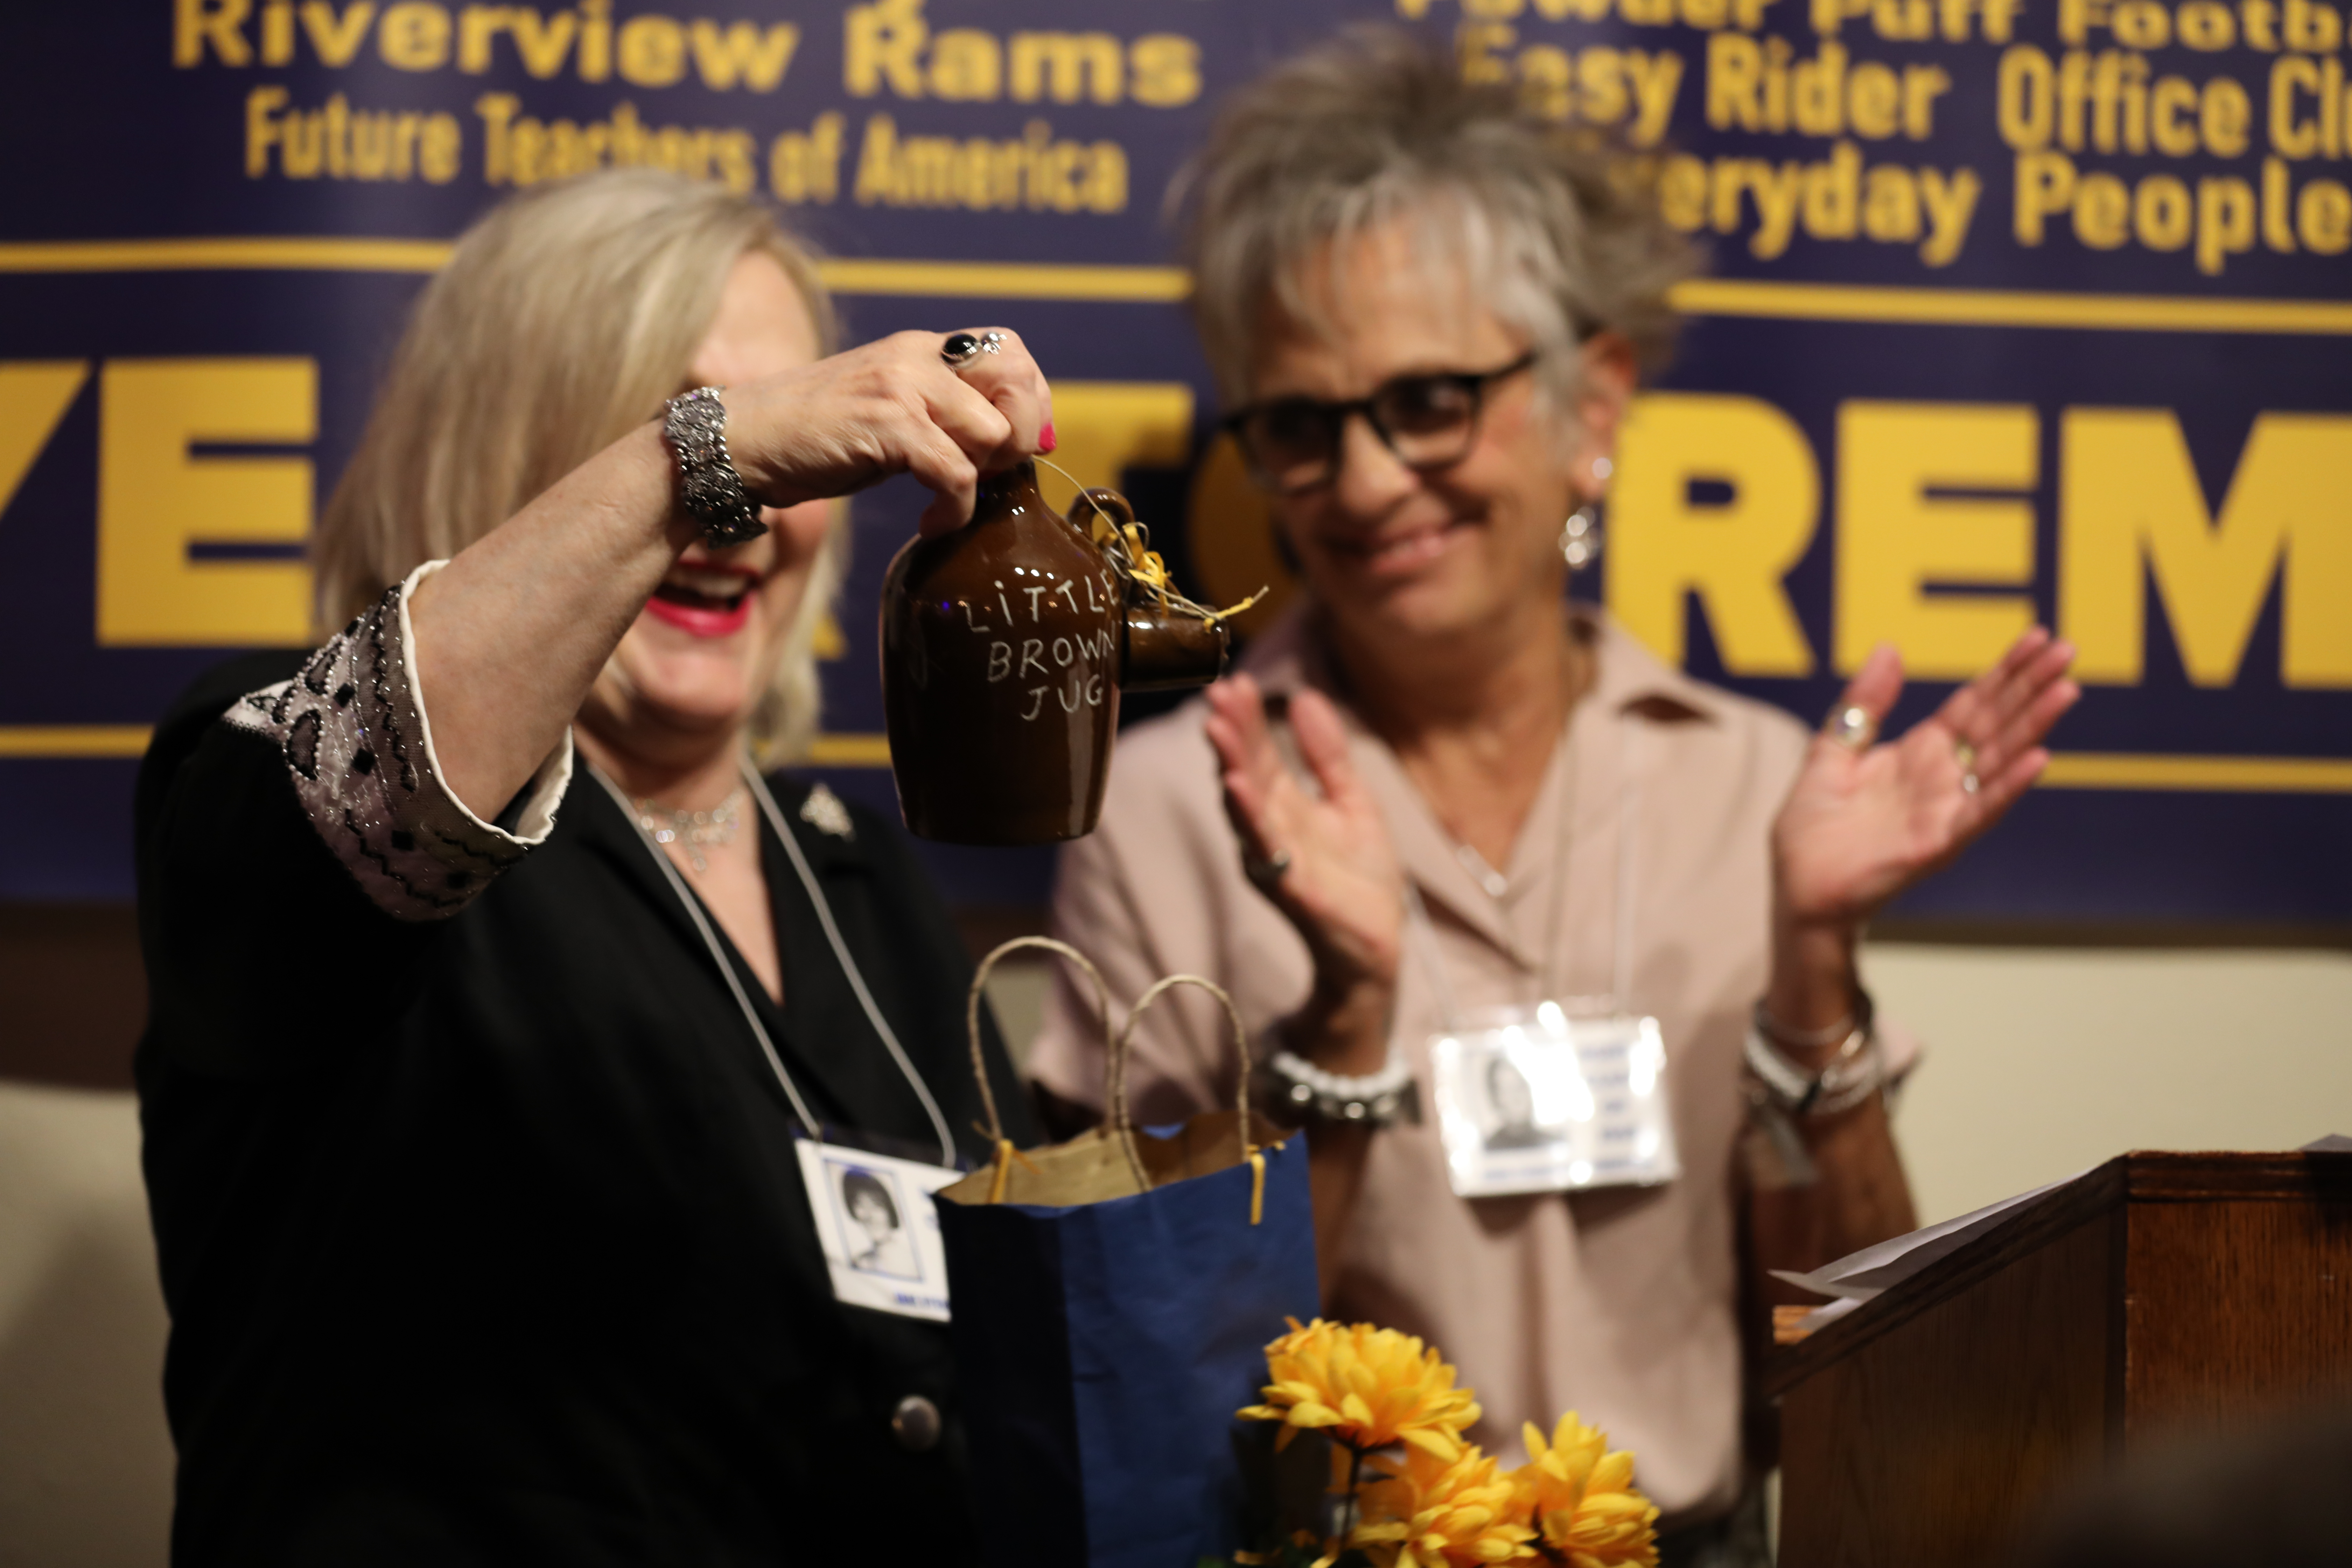 Jane Byers receives a Special Gift  from Runa - a Little Brown Jug! Picture by Dave Hartley.